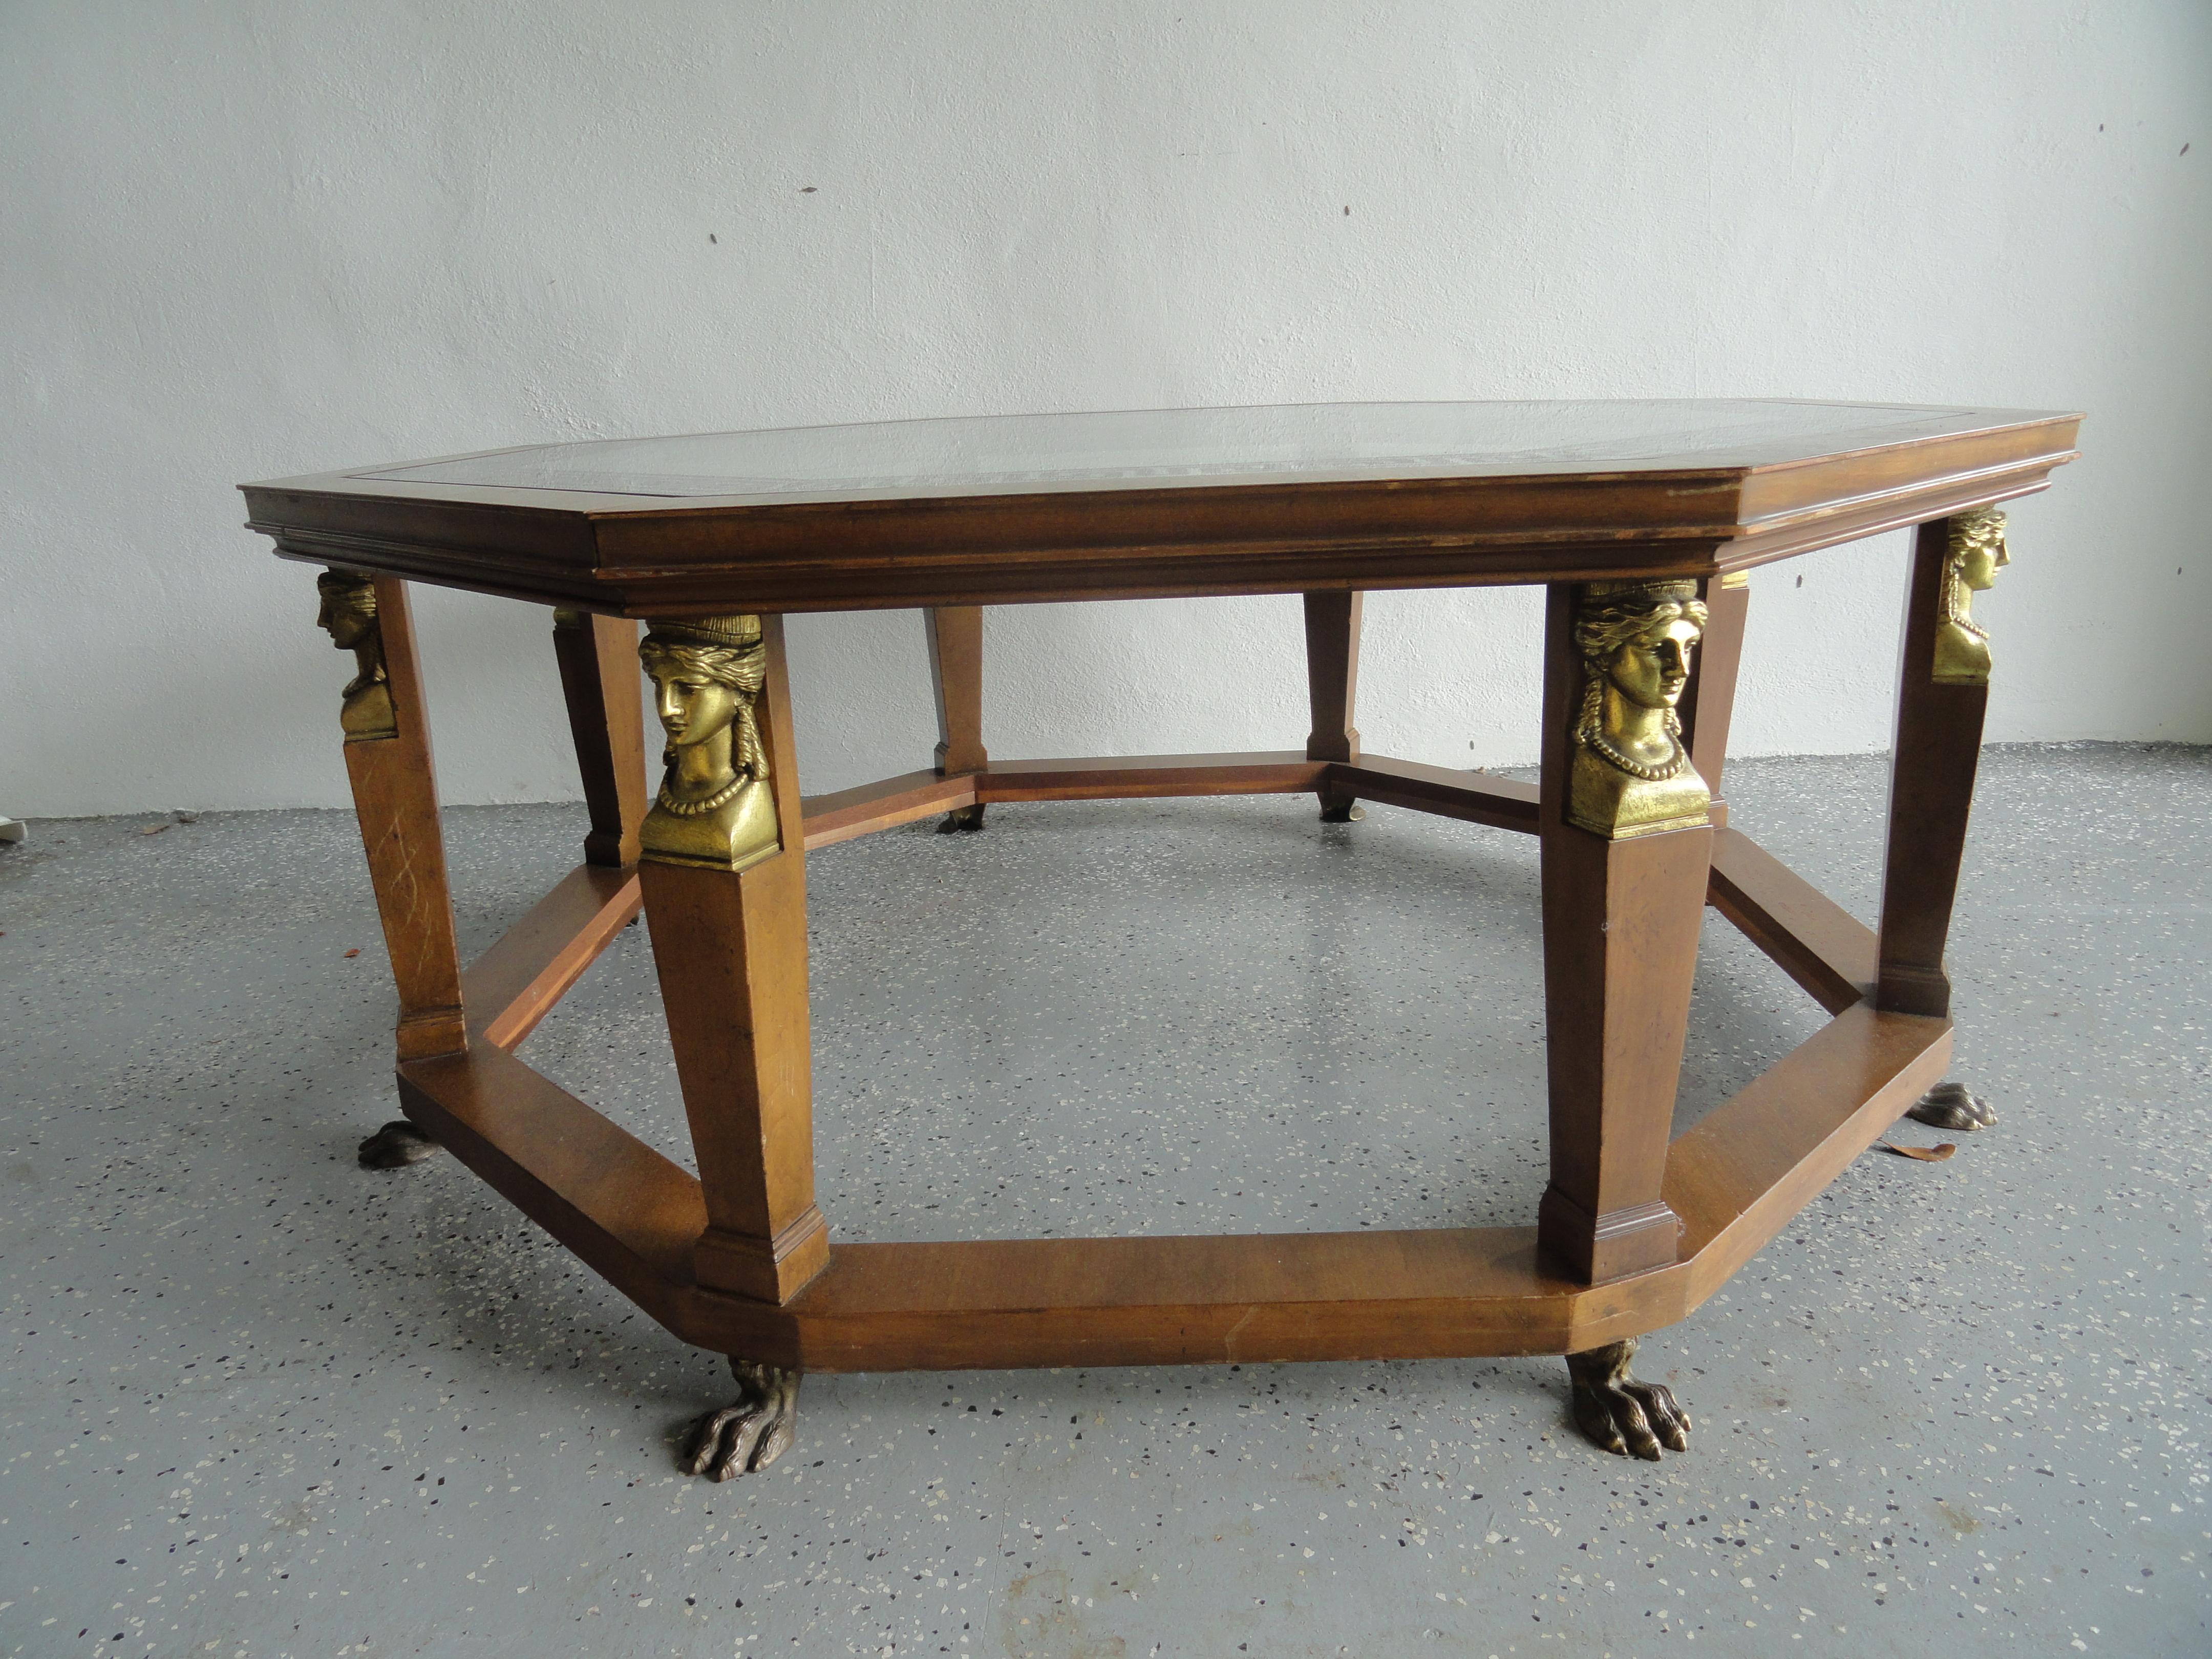 Octagonal coffee table from Baker Furniture. Octagonal glass top with Greek key border. Eight upright legs feature a brass claw and a brass caryatid supporting the top. Various woods, 1960s. Egyptian Revival.